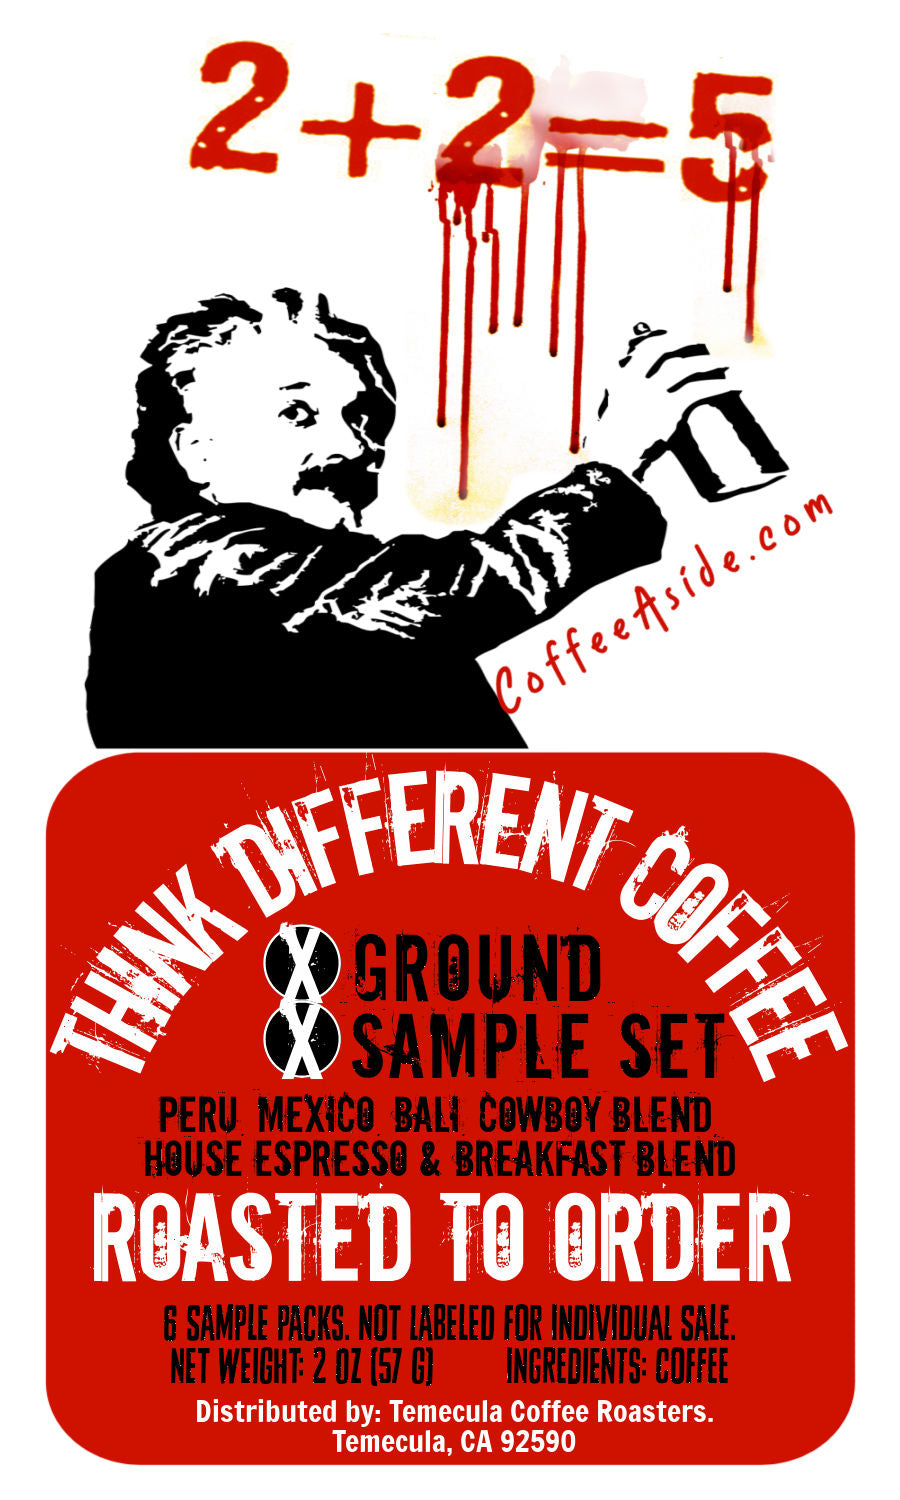 Think Different Coffees; Sampler Set [FREE SHIPPING]